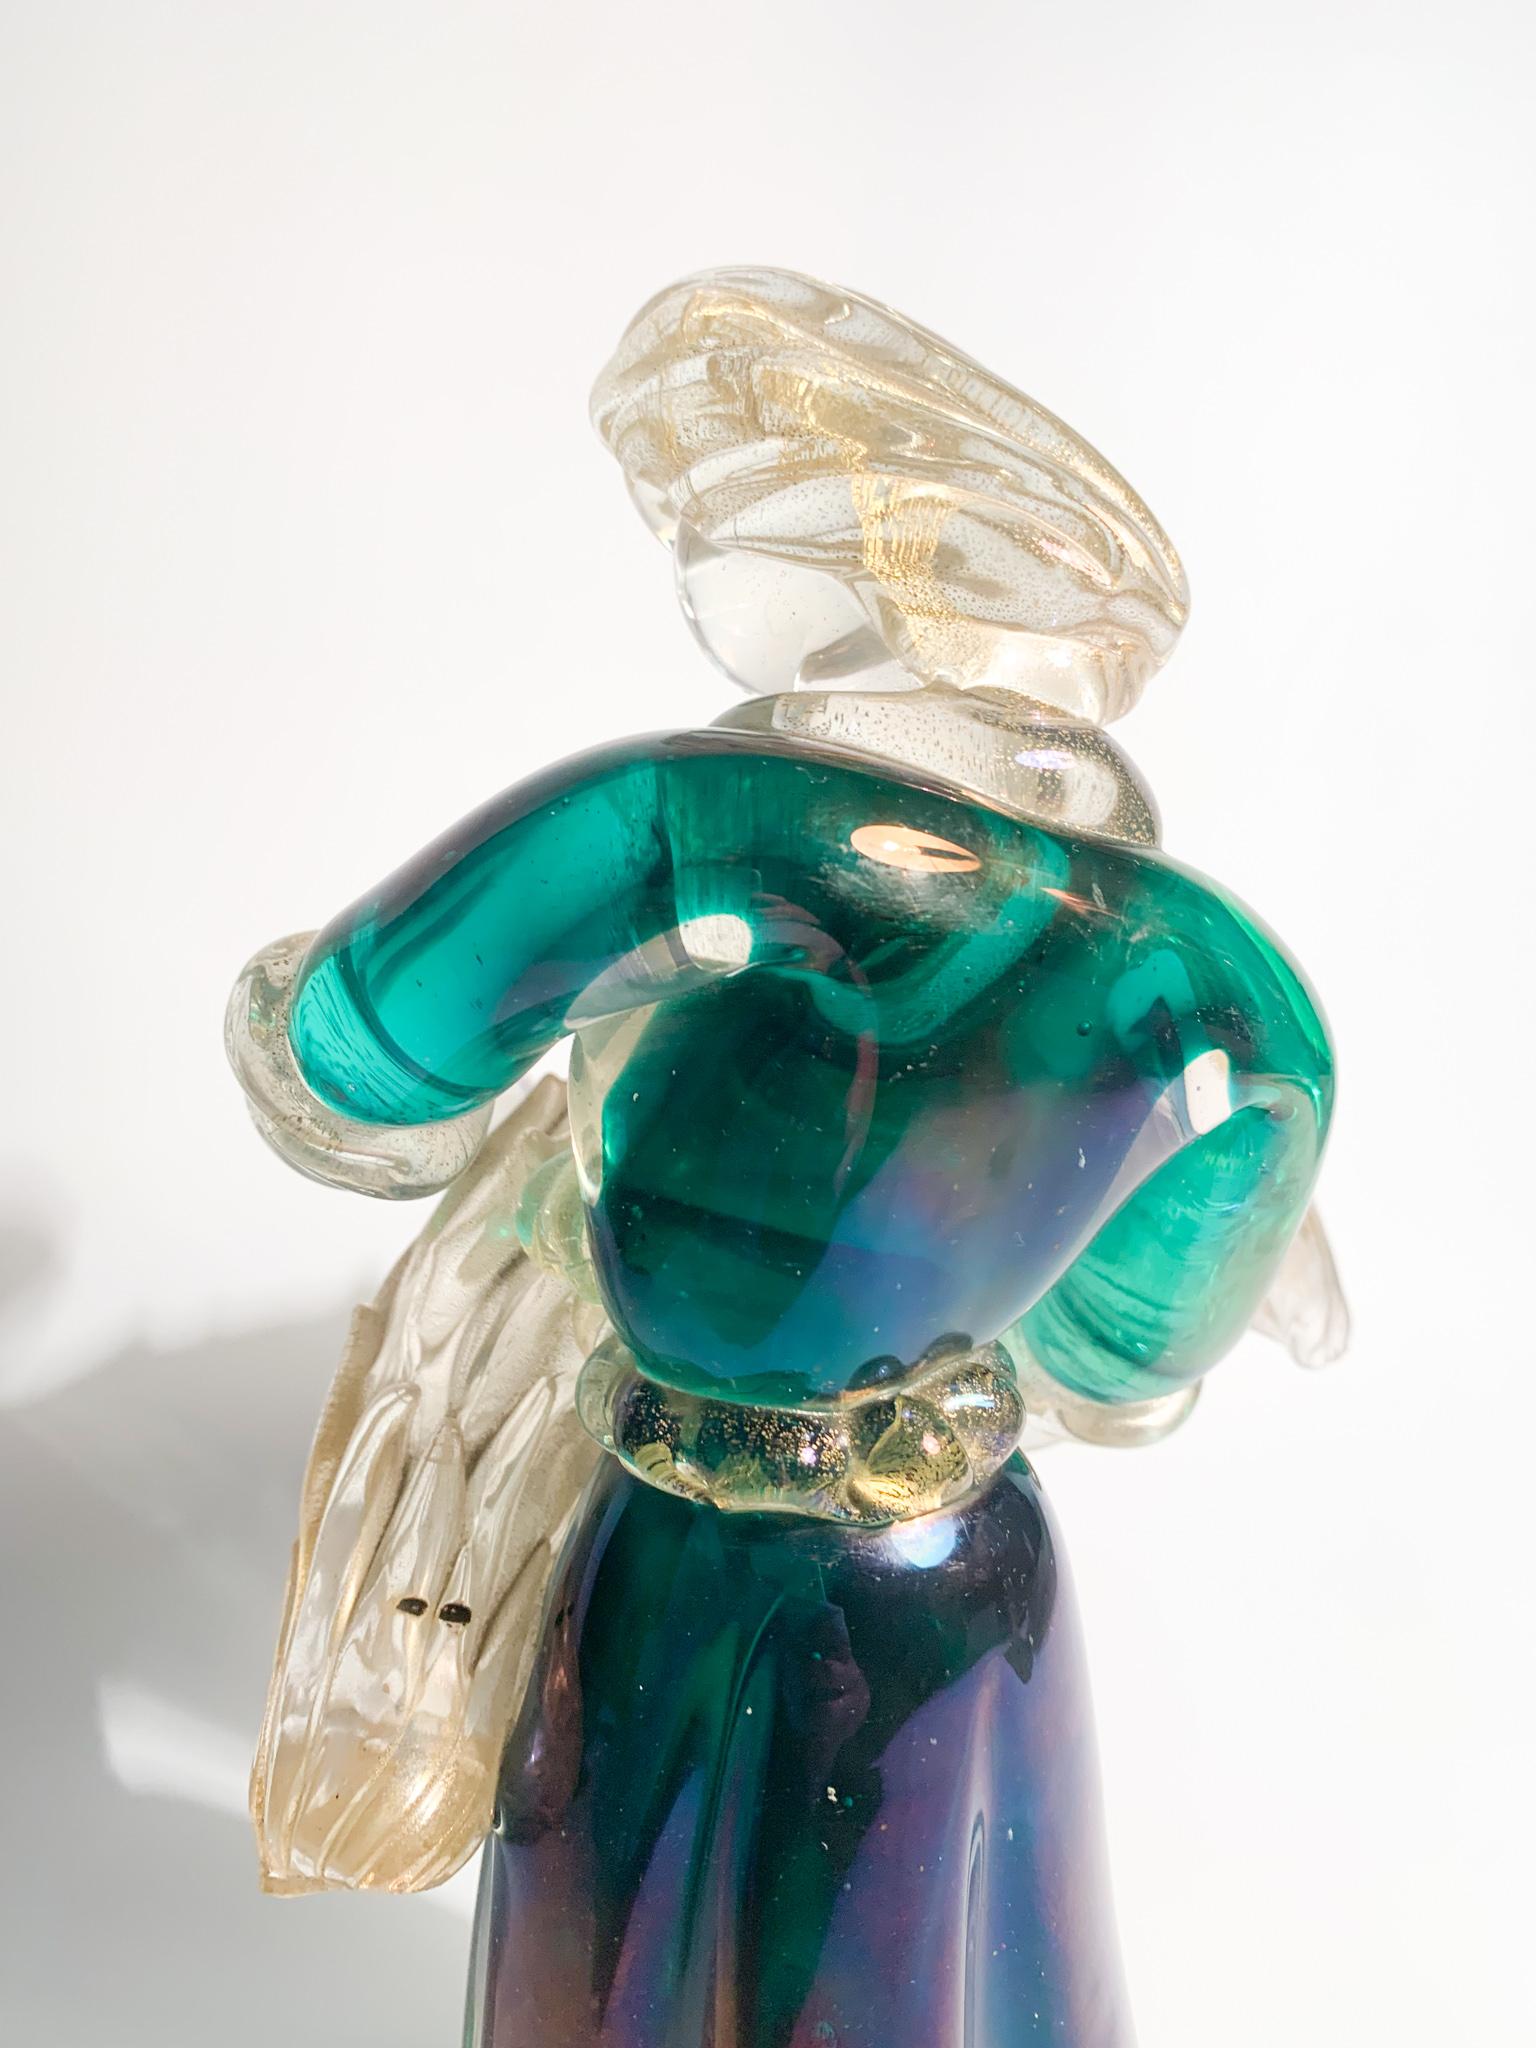 Iridescent Murano Glass Sculpture with Gold Leaves by Archimede Seguso 1940s For Sale 2